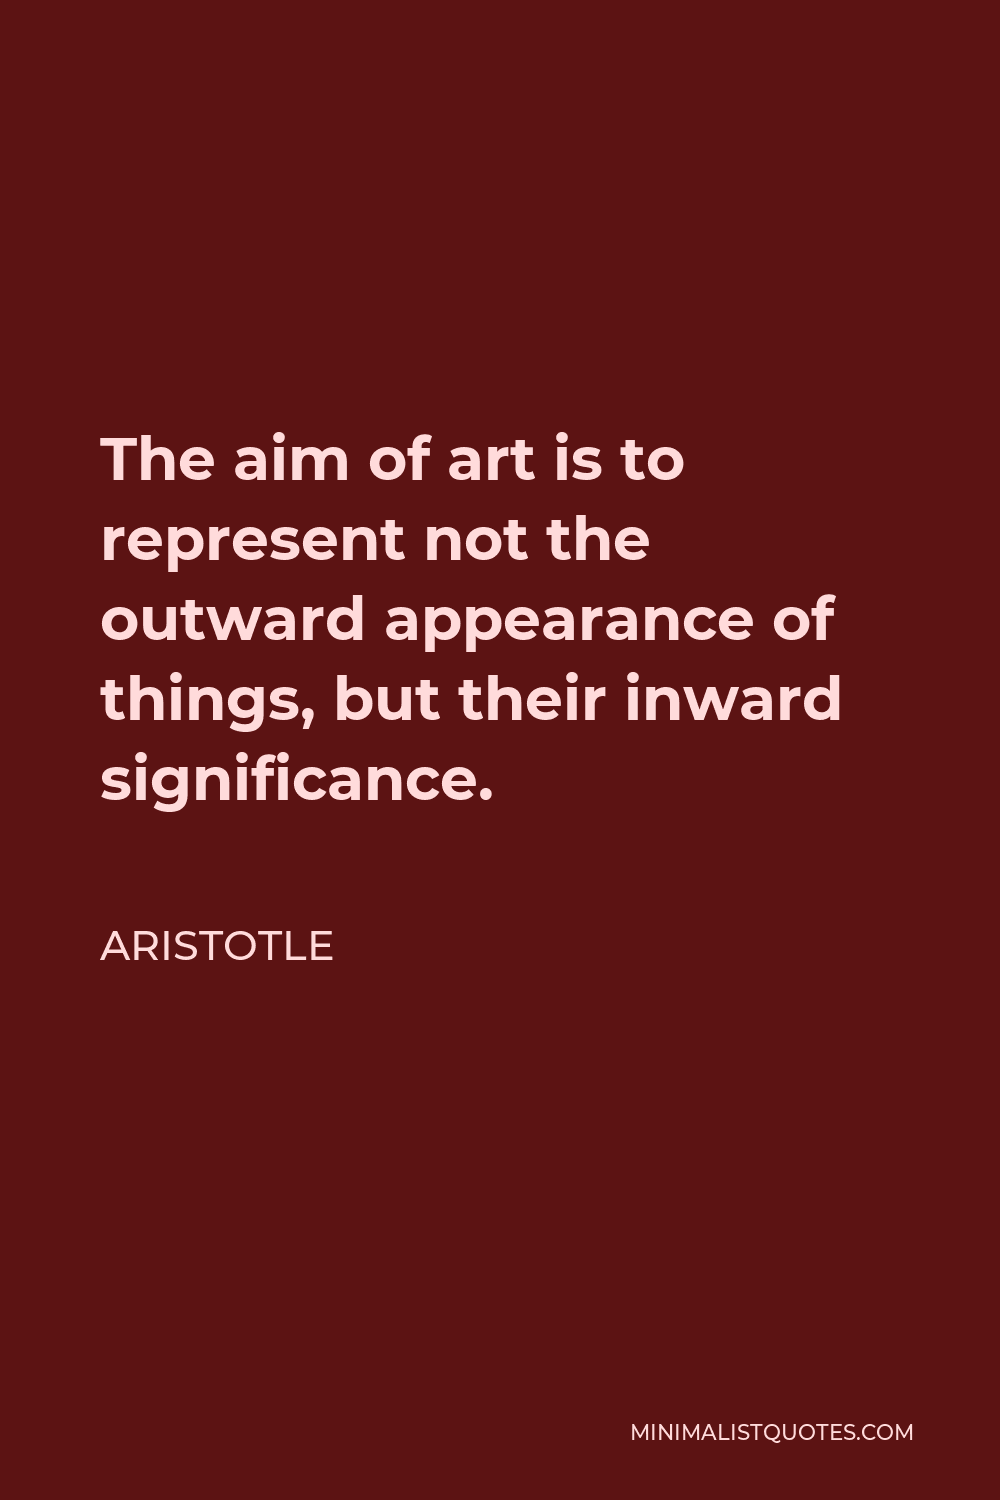 Aristotle Quote - The aim of art is to represent not the outward appearance of things, but their inward significance.